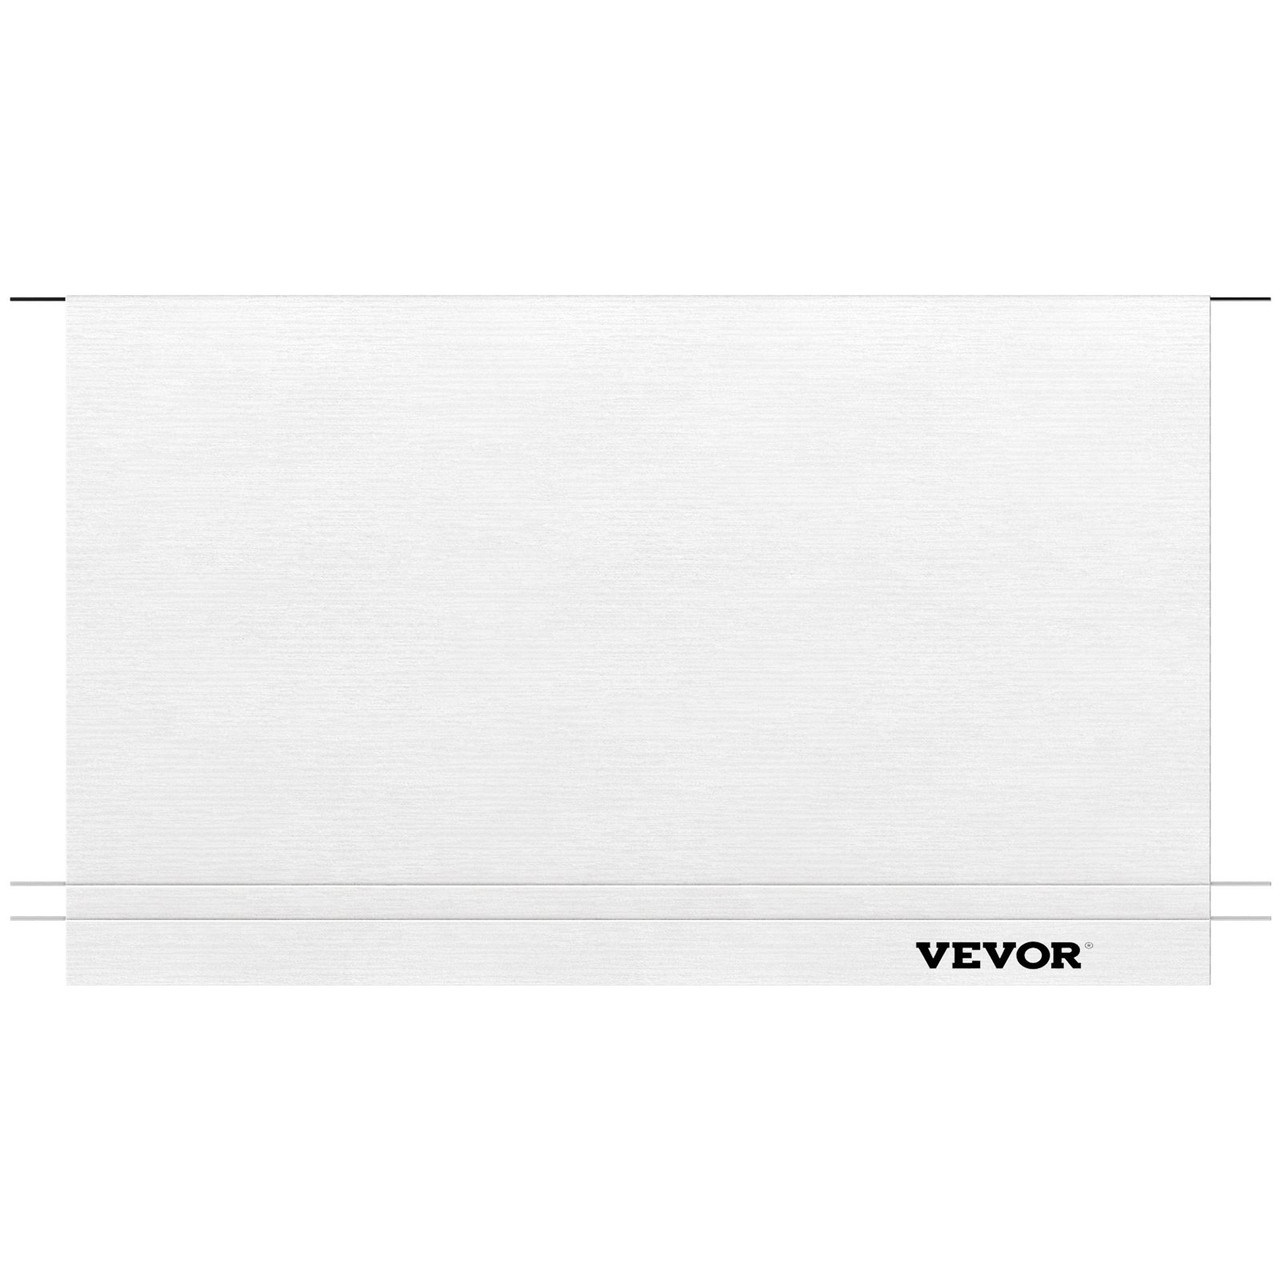 RV Awning Fabric Replacement, 16 ft, 15oz Vinyl Waterproof Sun Shade, Outdoor Canopy RV Replacement Fabric for Camper, Trailer, and Motor Home Awnings, Fabric Size 15'2"White